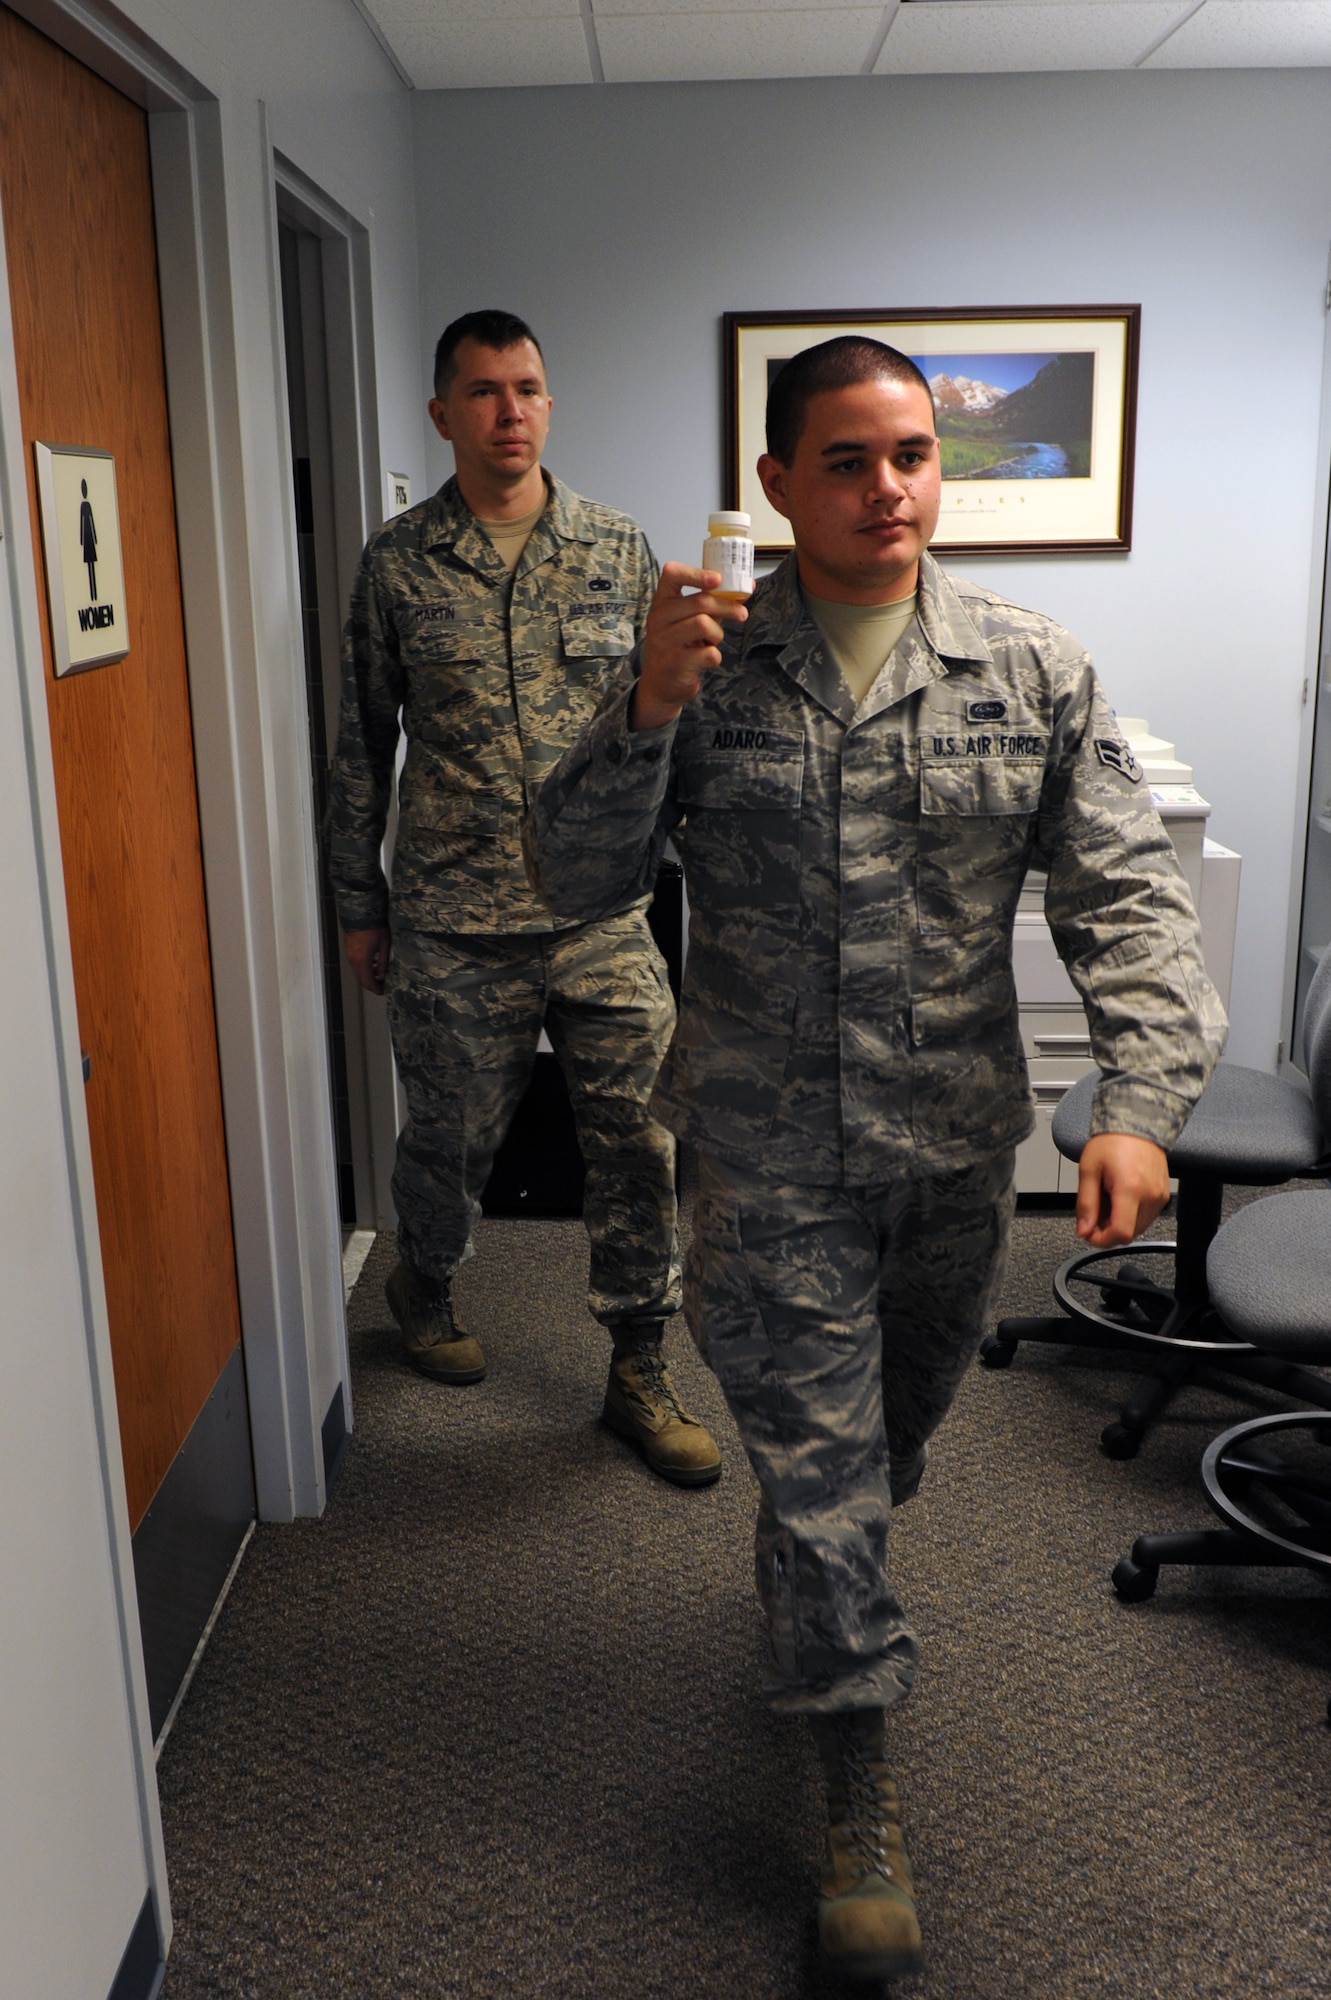 A Team Little Rock member is escorted out of the restroom by Staff Sgt. Lee Martin, a urinalysis observer after providing a urine sample Aug. 30, 2011, at Little Rock Air Force Base, Ark. Members of the Drug Demand Reduction Program team, along with administering urinalysis, also can search squadron and dormitories for drugs. (U.S. Air Force photo by Airman 1st Class Rusty Frank)